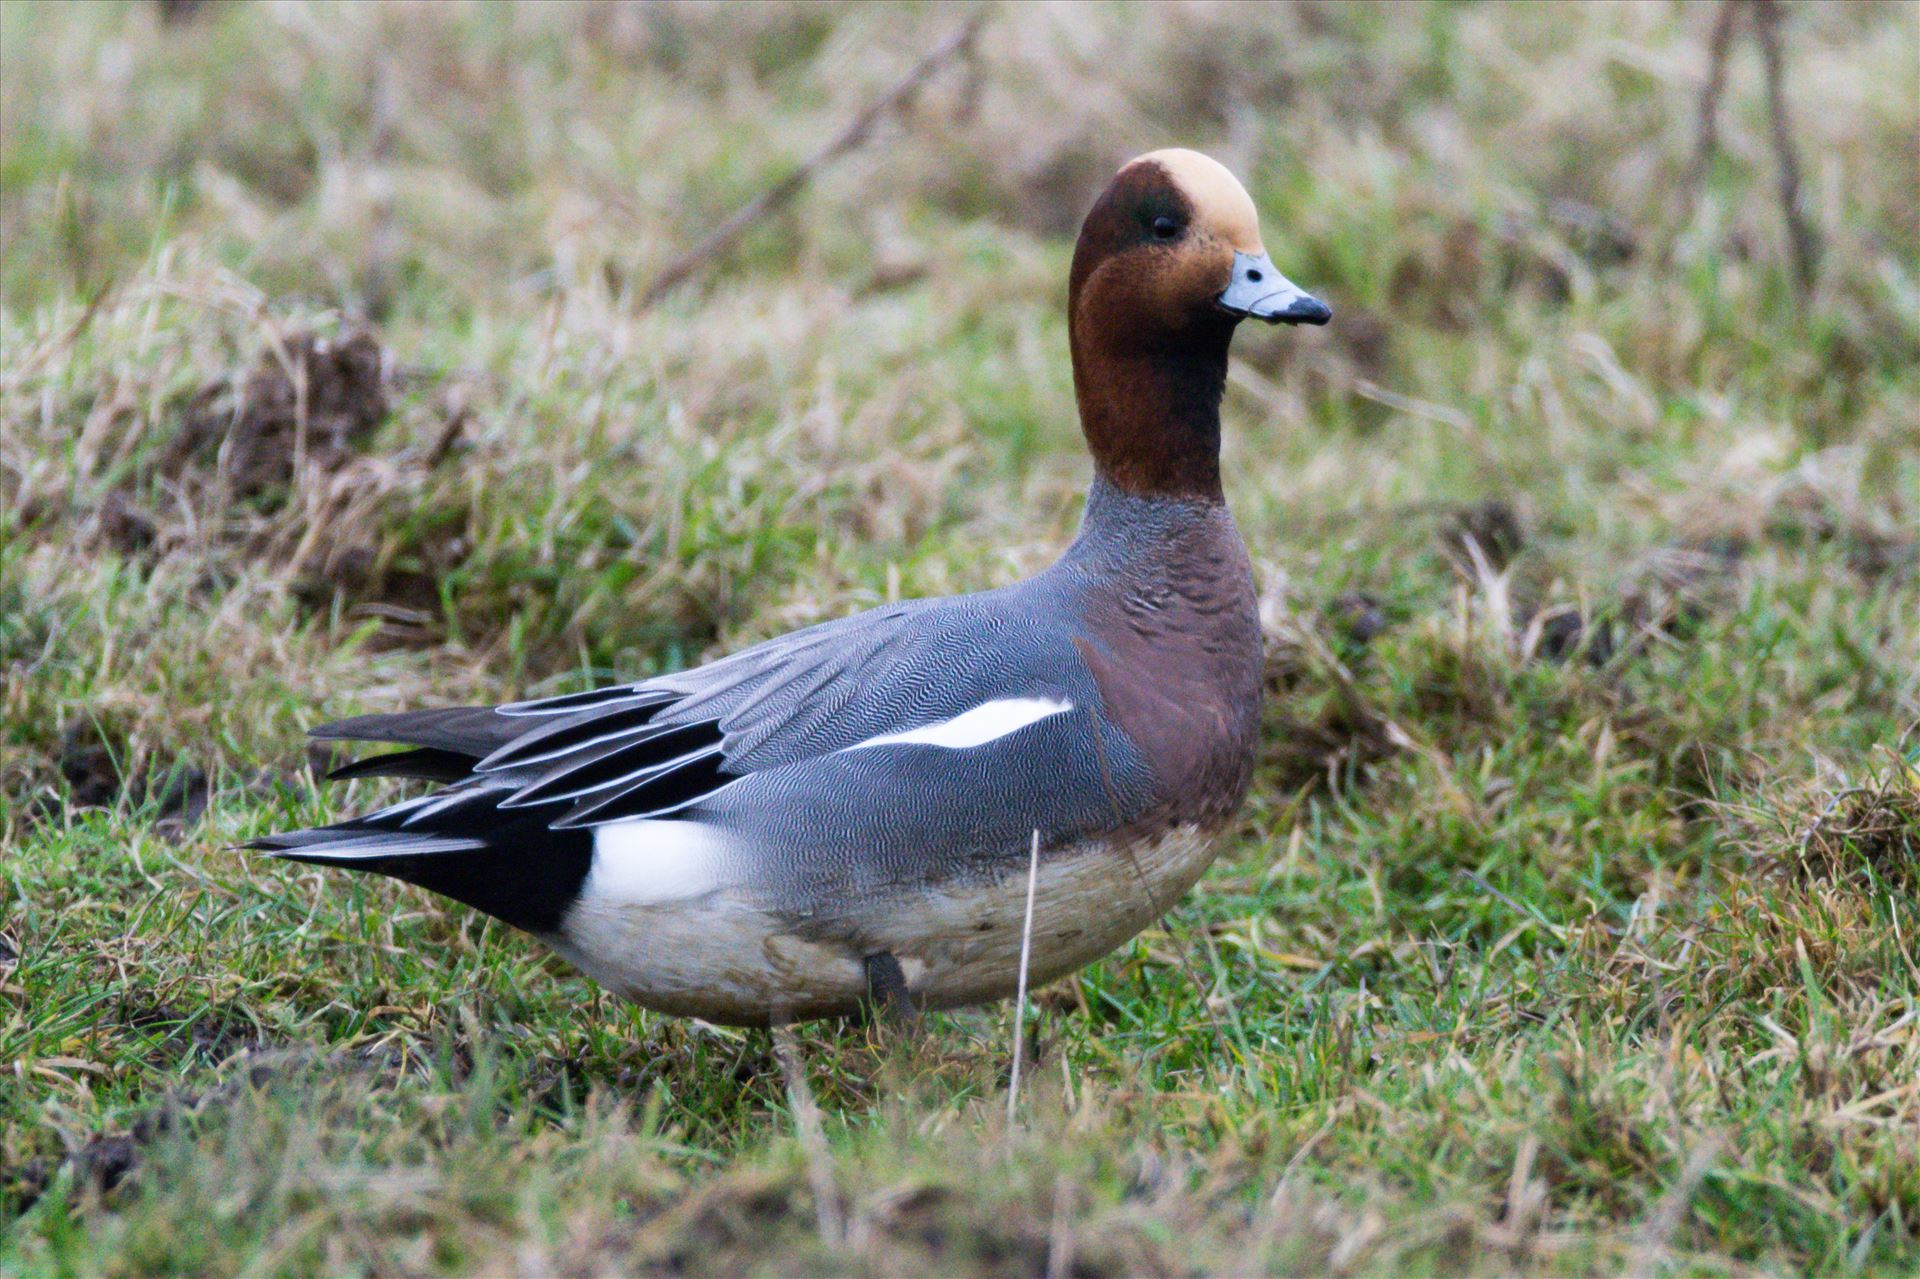 Wigeon, Taken at North Gare, Seaton - A Wigeon taken at North Gare, Seaton by AJ Stoves Photography